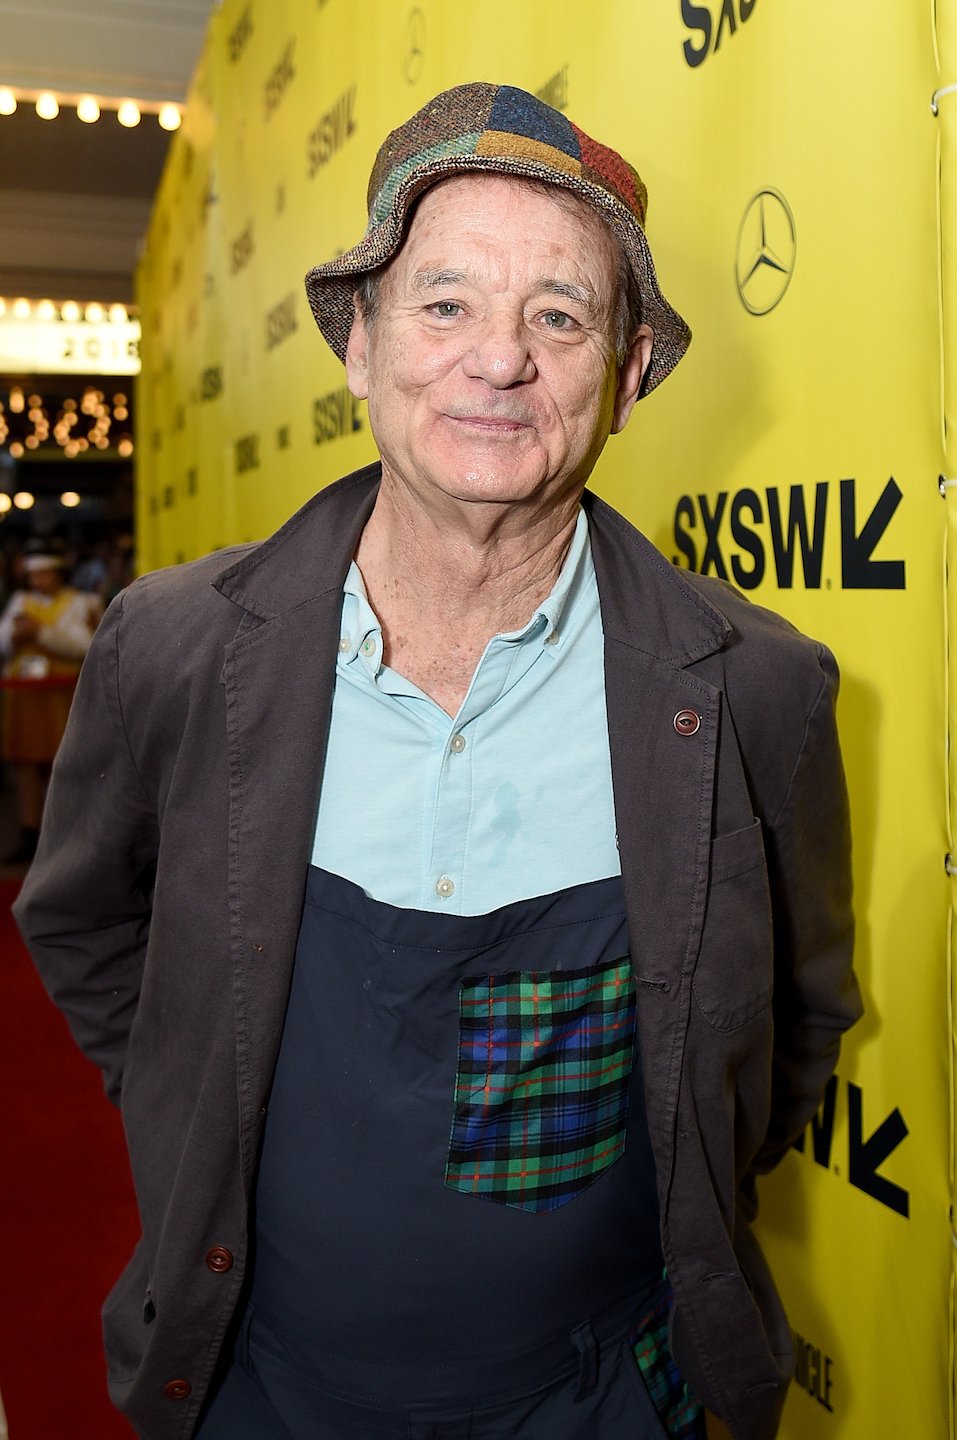 Bill Murray at the Isle of Dogs Premiere. Photo by Michael Loccisano/Getty Images for SXSW